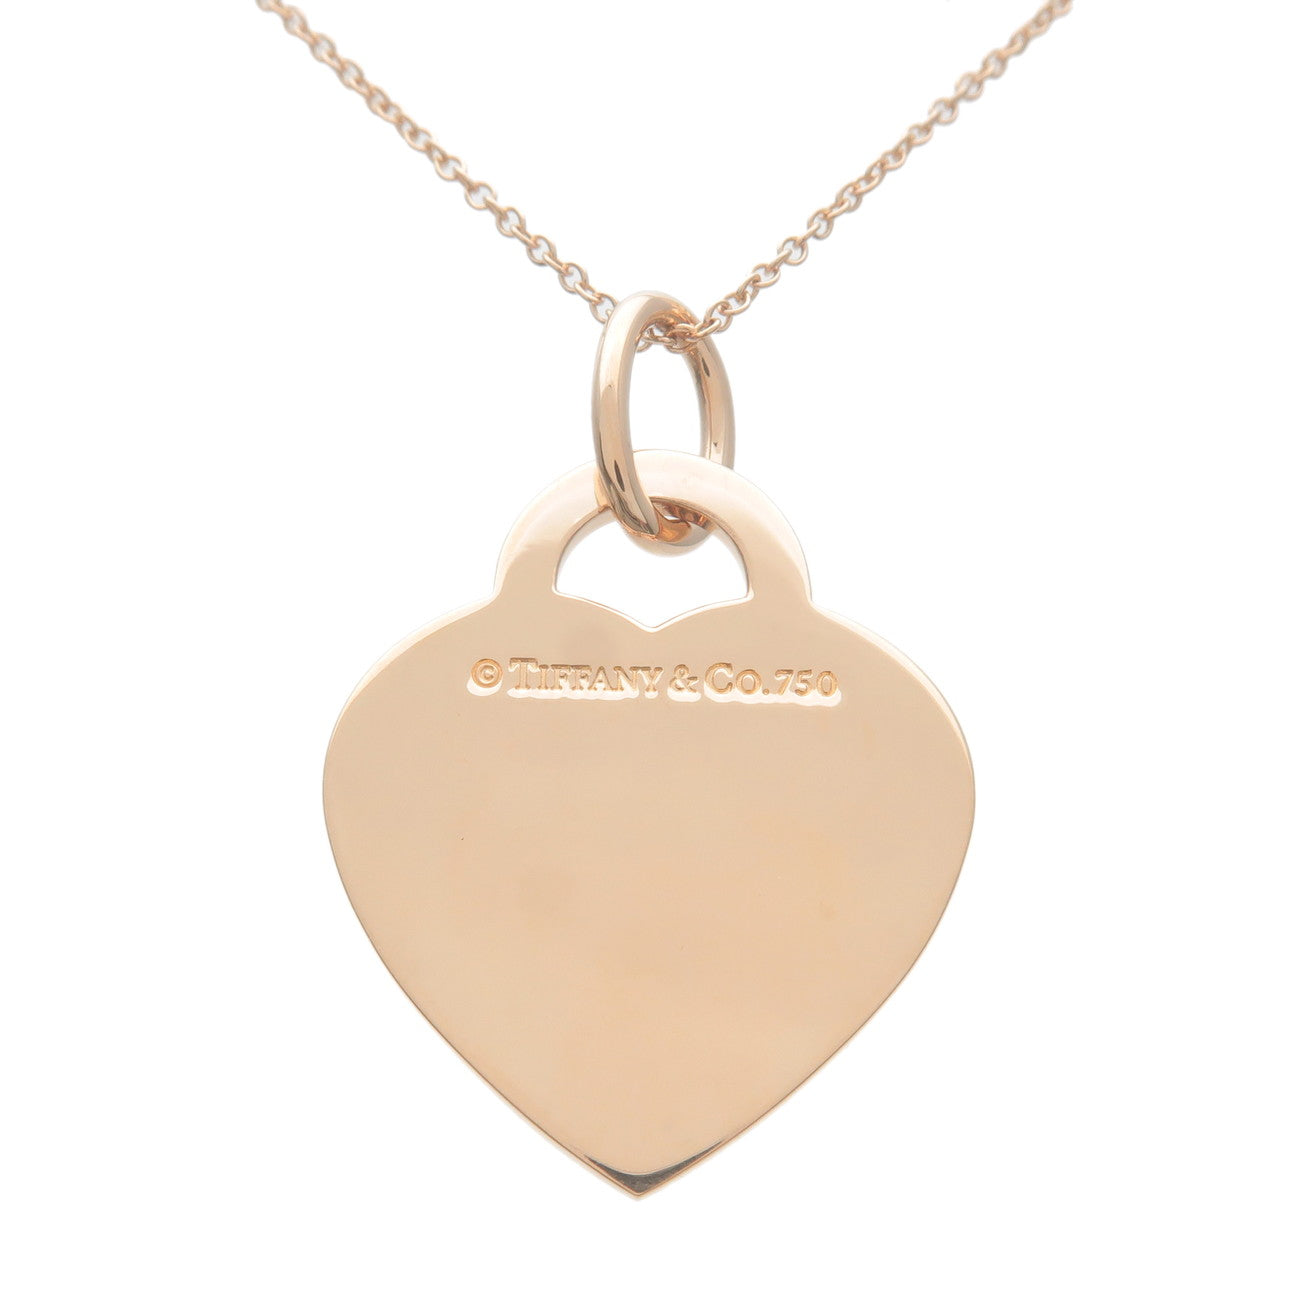 Tiffany&Co. Return to Tiffany Heart Tag Necklace K18PG Rose Gold